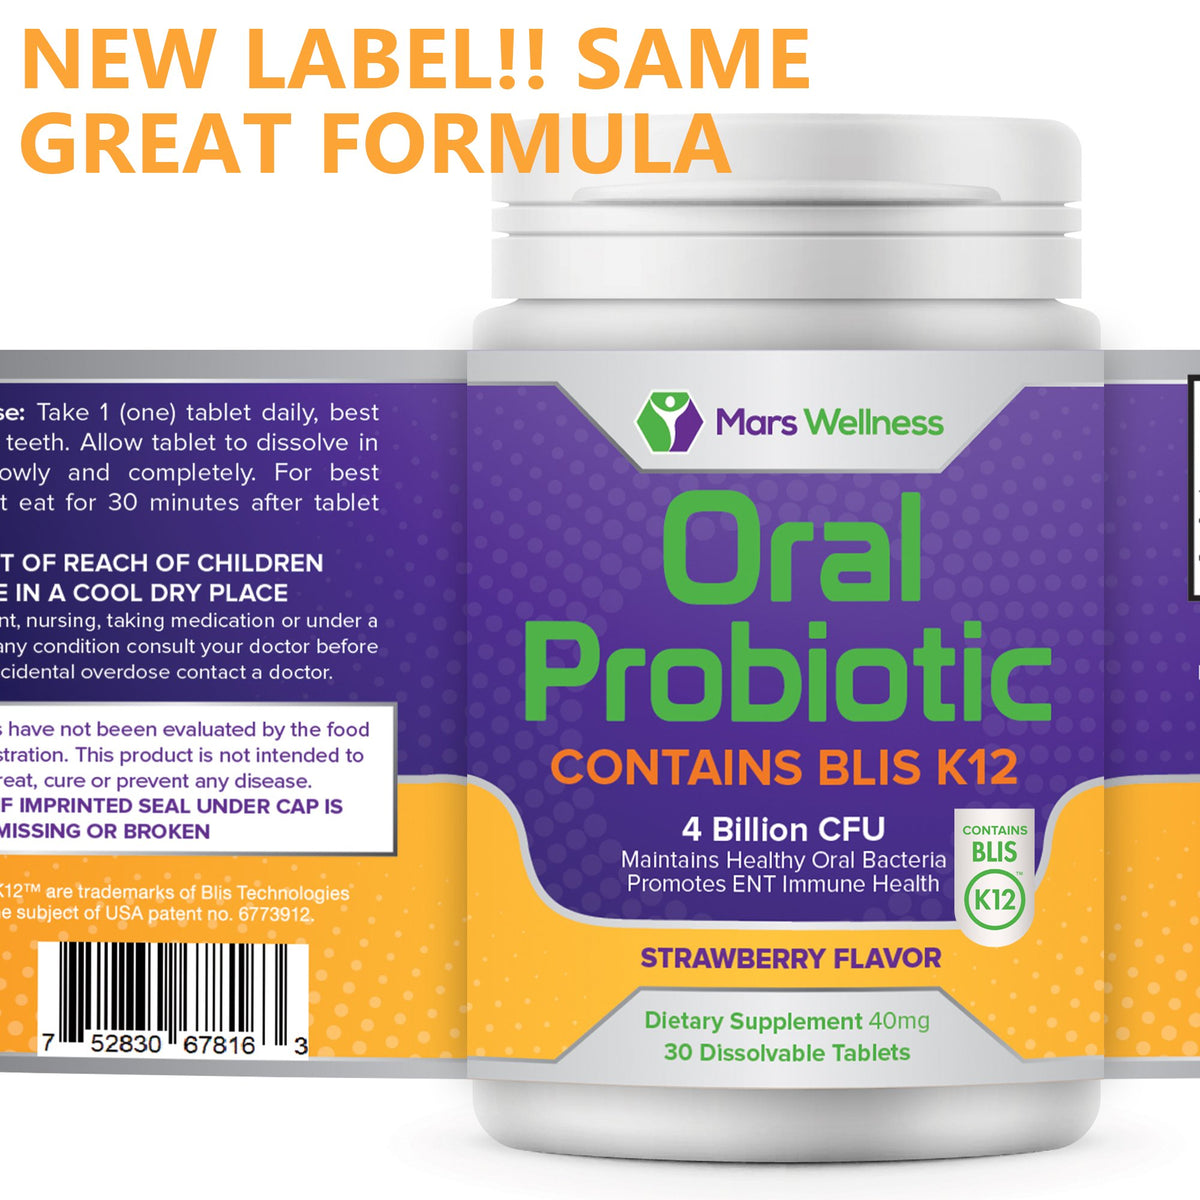 Oral Probiotic Supplement with BLIS K12 4 Billion CFU - Now Dairy Free - Doctor Formulated for Bad Breath, Strep, Cavities, Gum and Oral and Dental Health - Sugar Free - USA Made